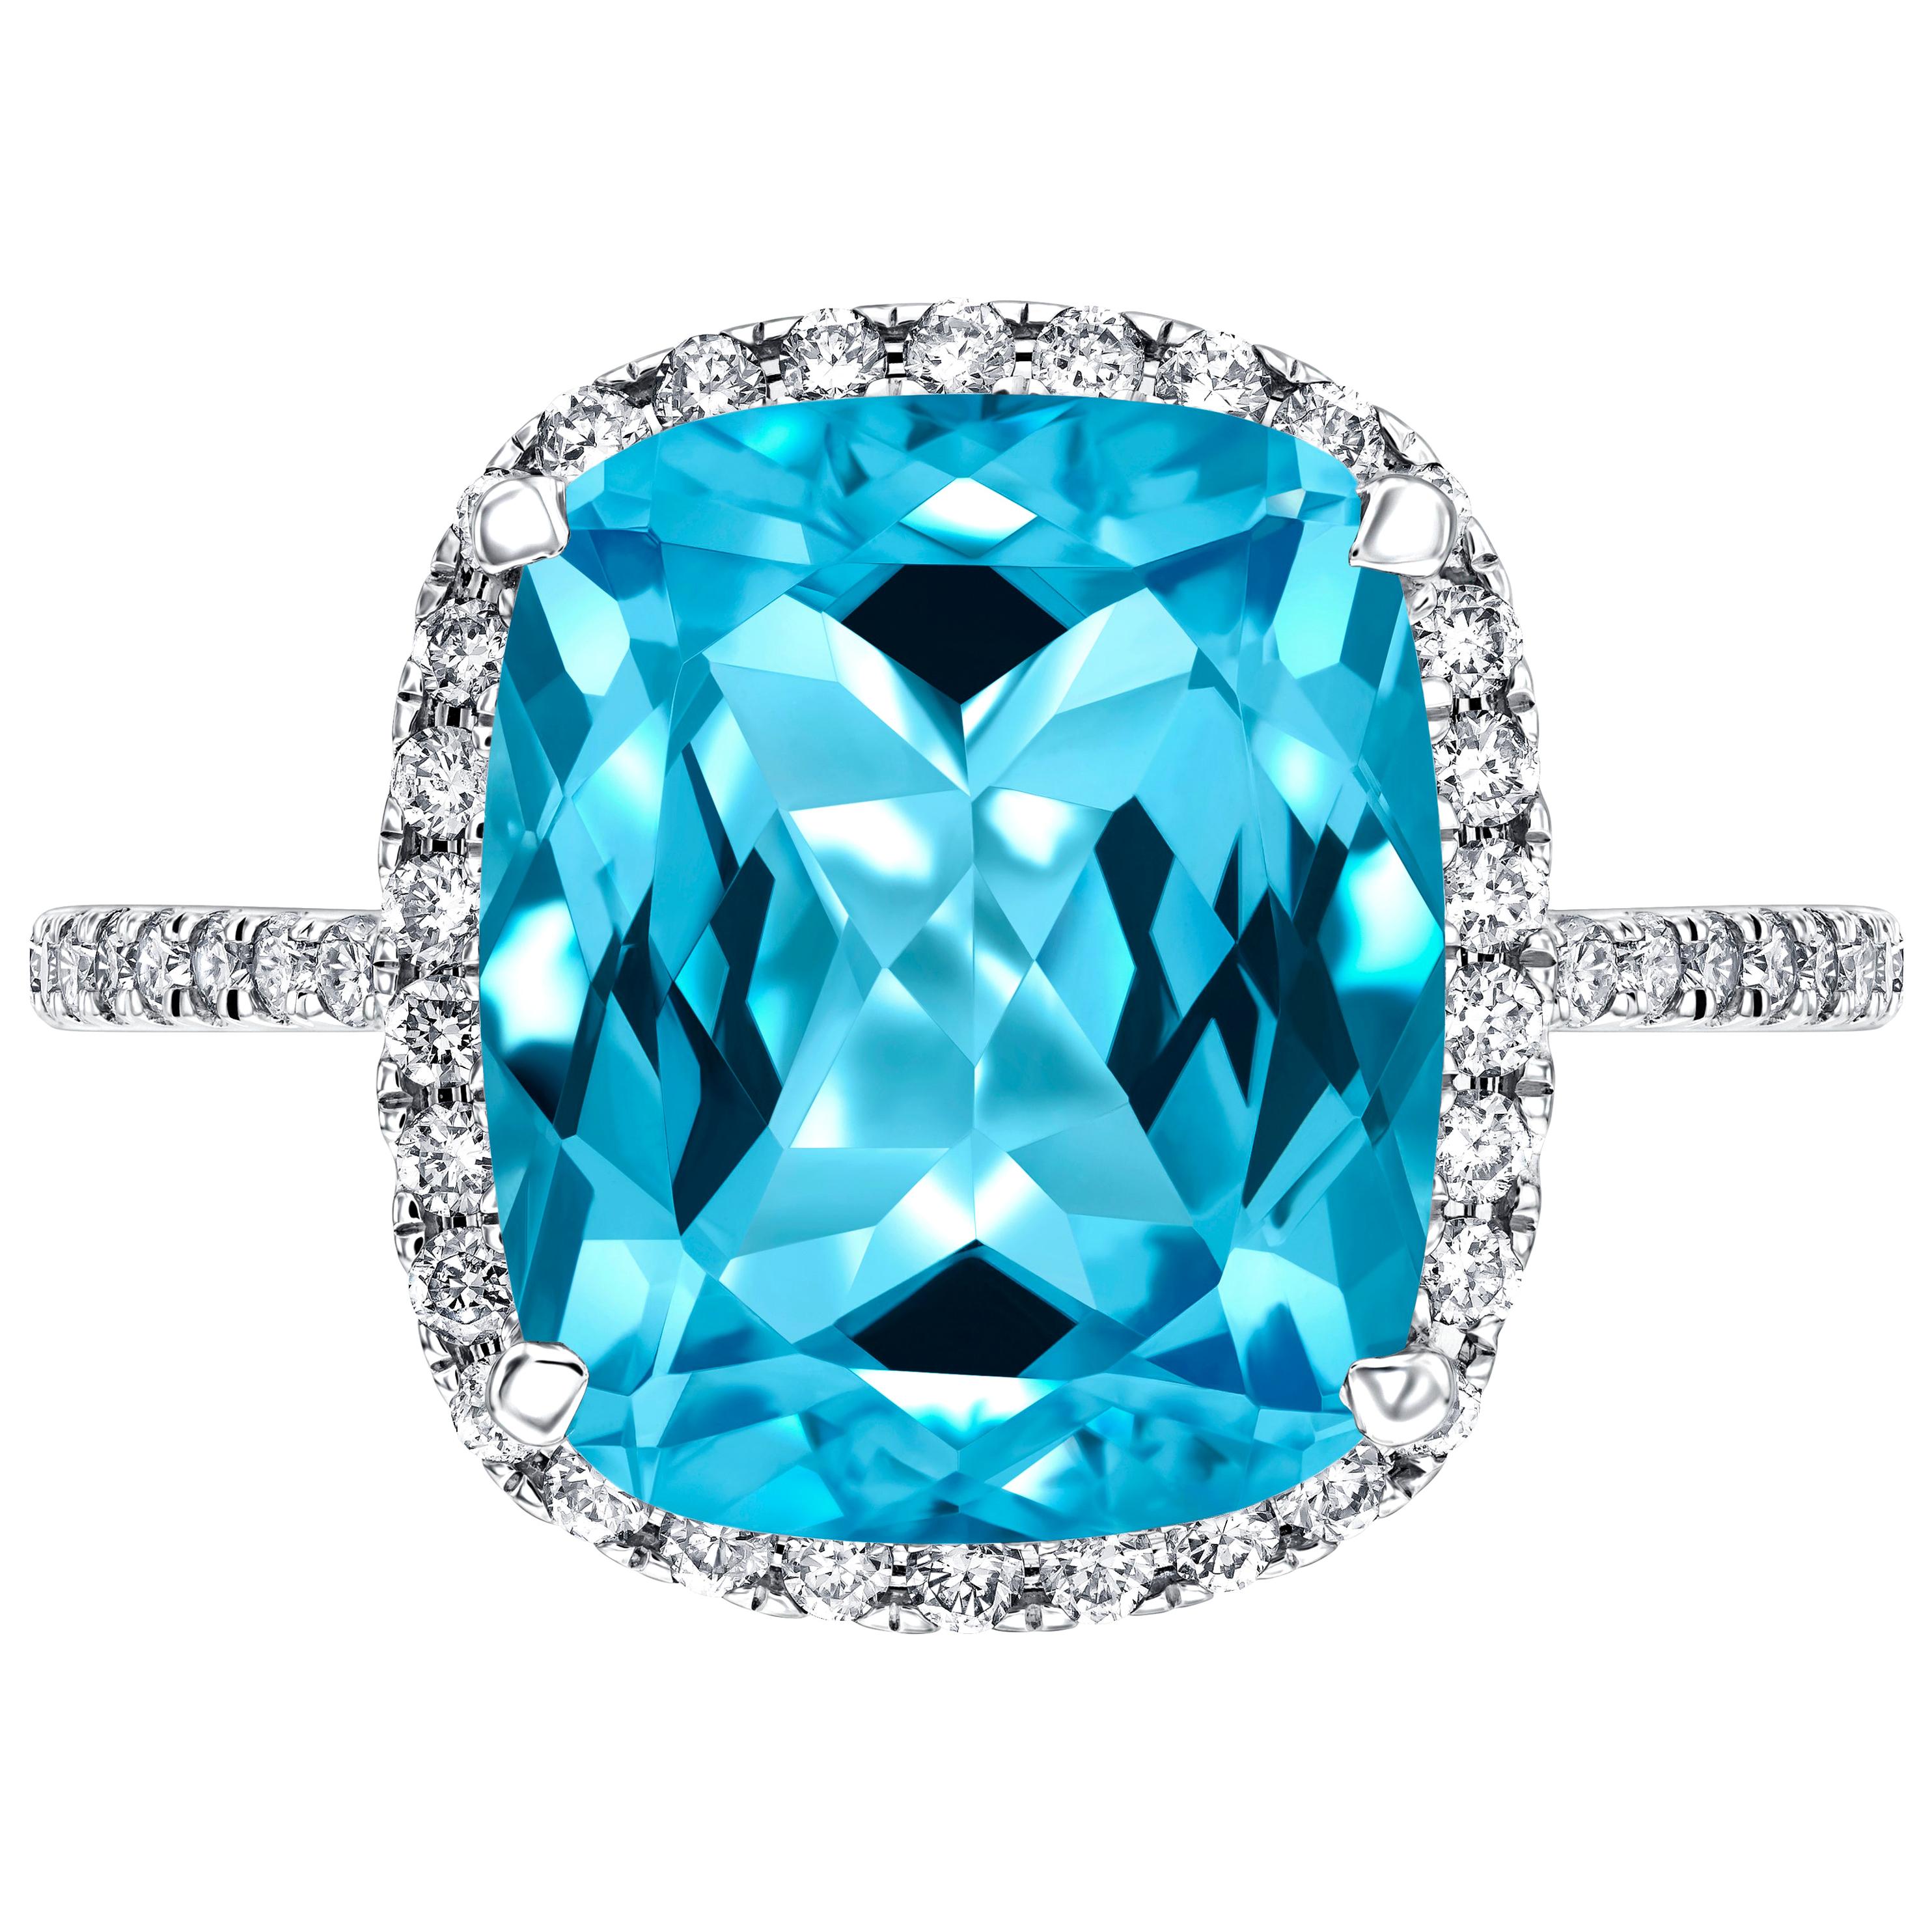 An impressive 6 Carat (approximately) Cushion Cut Blue Topaz Dress / Engagement Ring surrounded by a pave set halo and both sides of the shank With a total diamond weight of 0.38 carat white round brilliant cut diamonds. 

This Ring has been